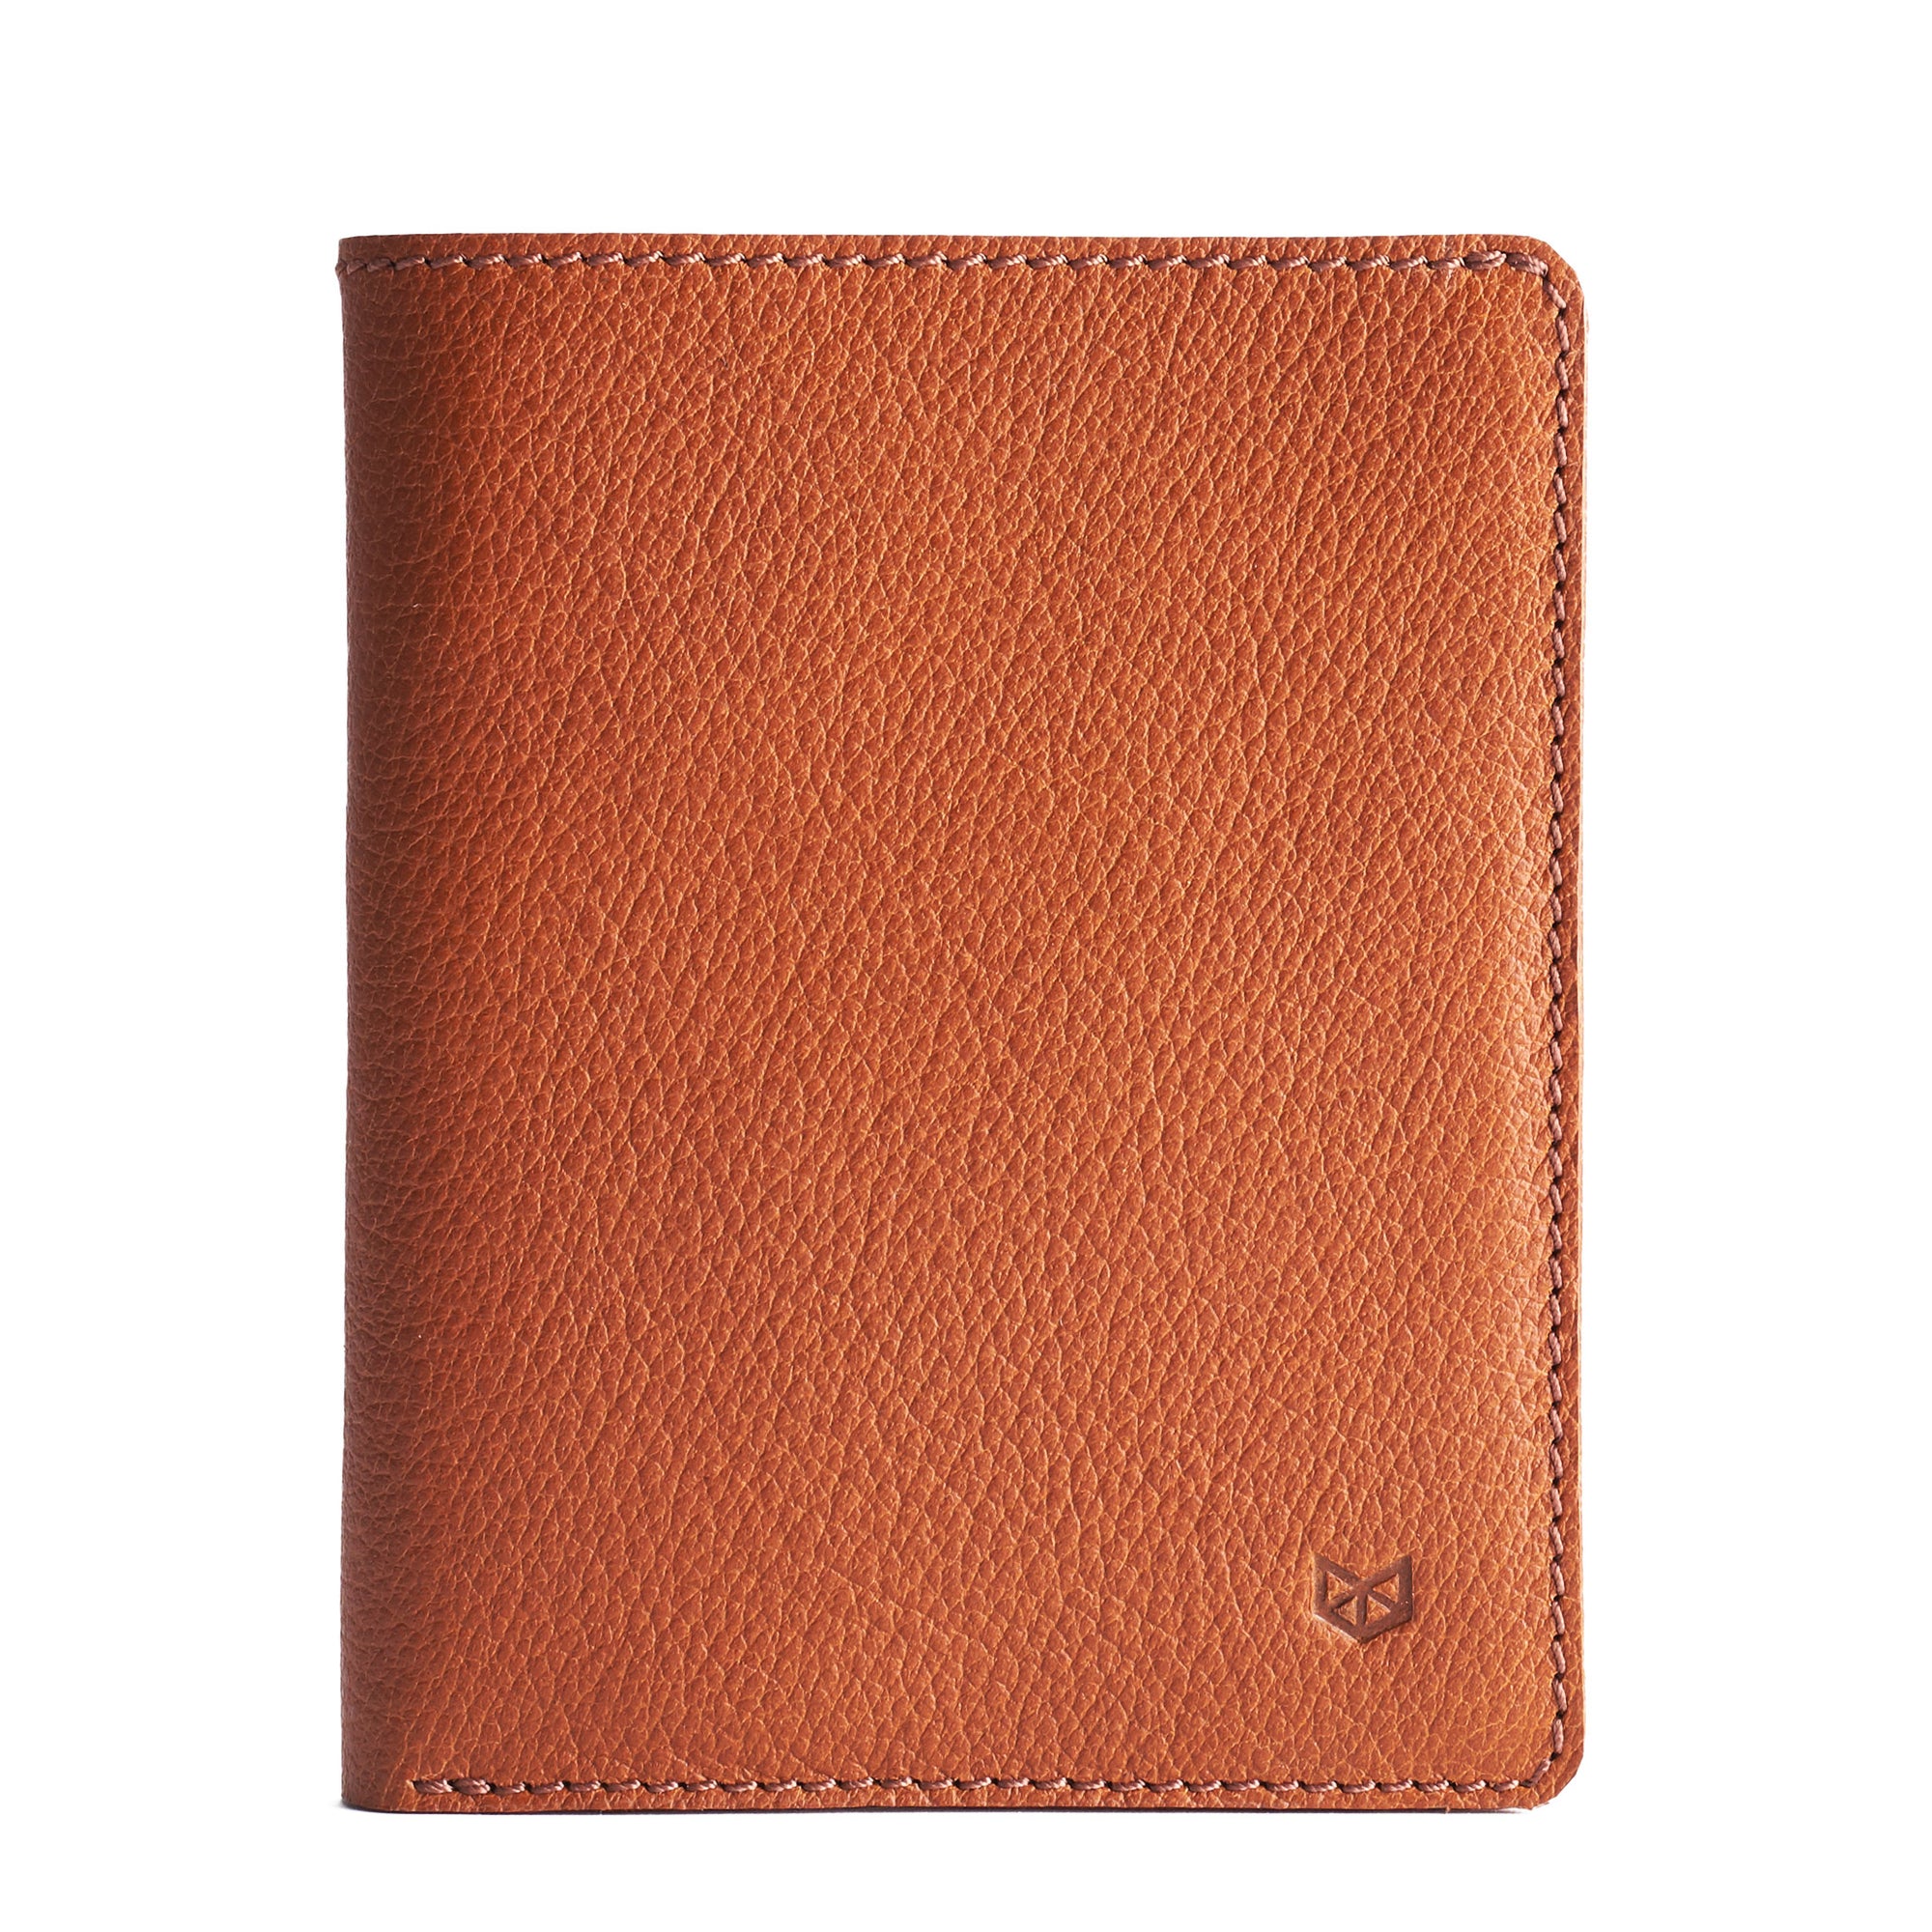 Cover. Pocket Passport Holder Travel Wallet Tan by Capra Leather